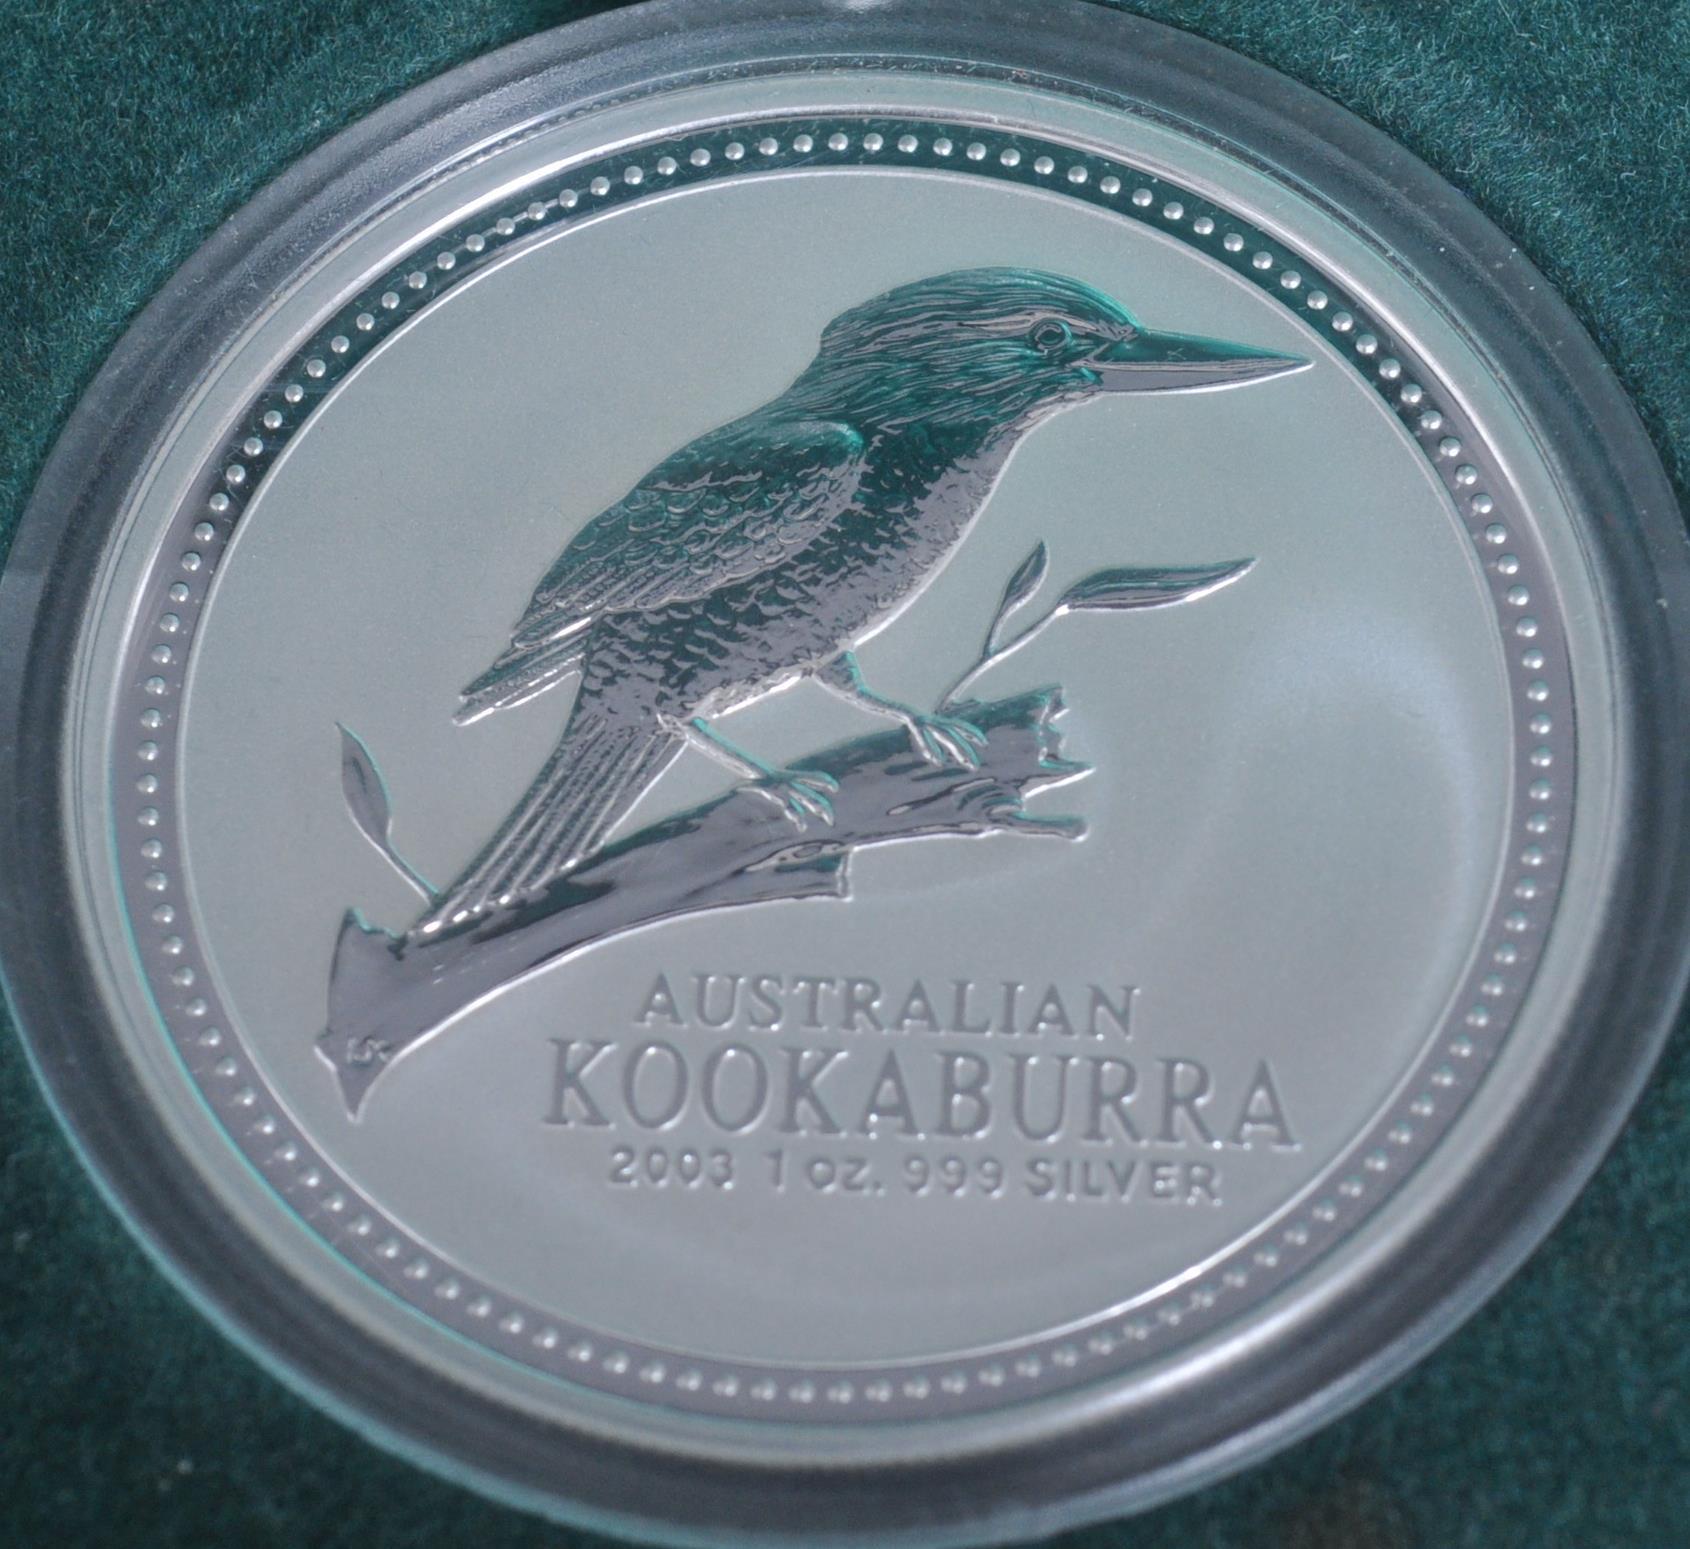 COLLECTION OF THREE KOOKABURRA .999 SILVER COINS - Image 3 of 4